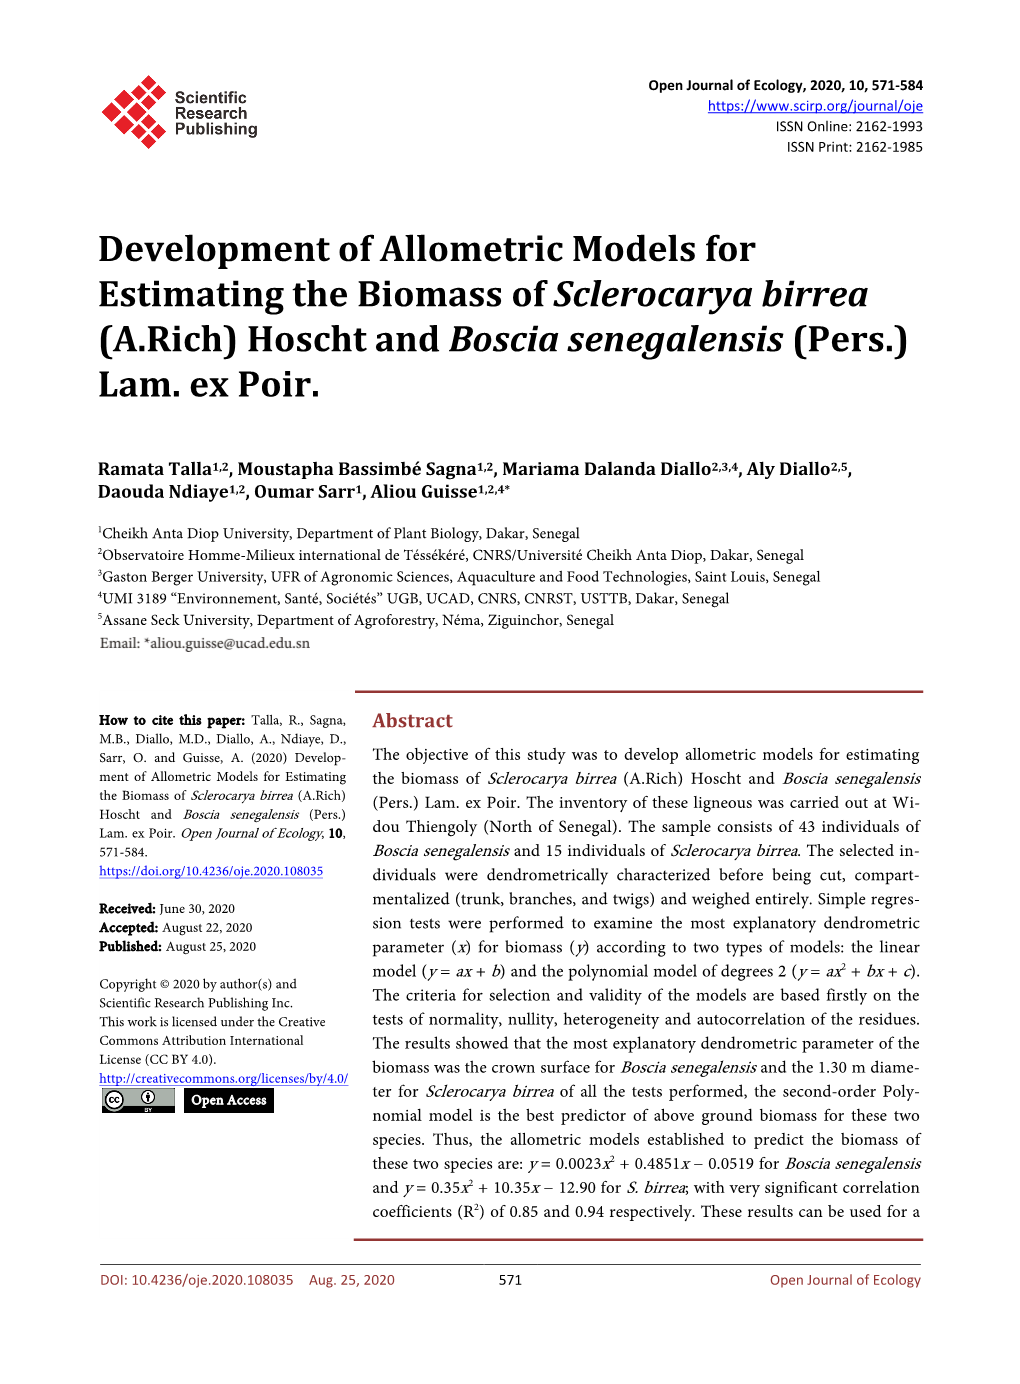 Development of Allometric Models for Estimating the Biomass of Sclerocarya Birrea (A.Rich) Hoscht and Boscia Senegalensis (Pers.) Lam